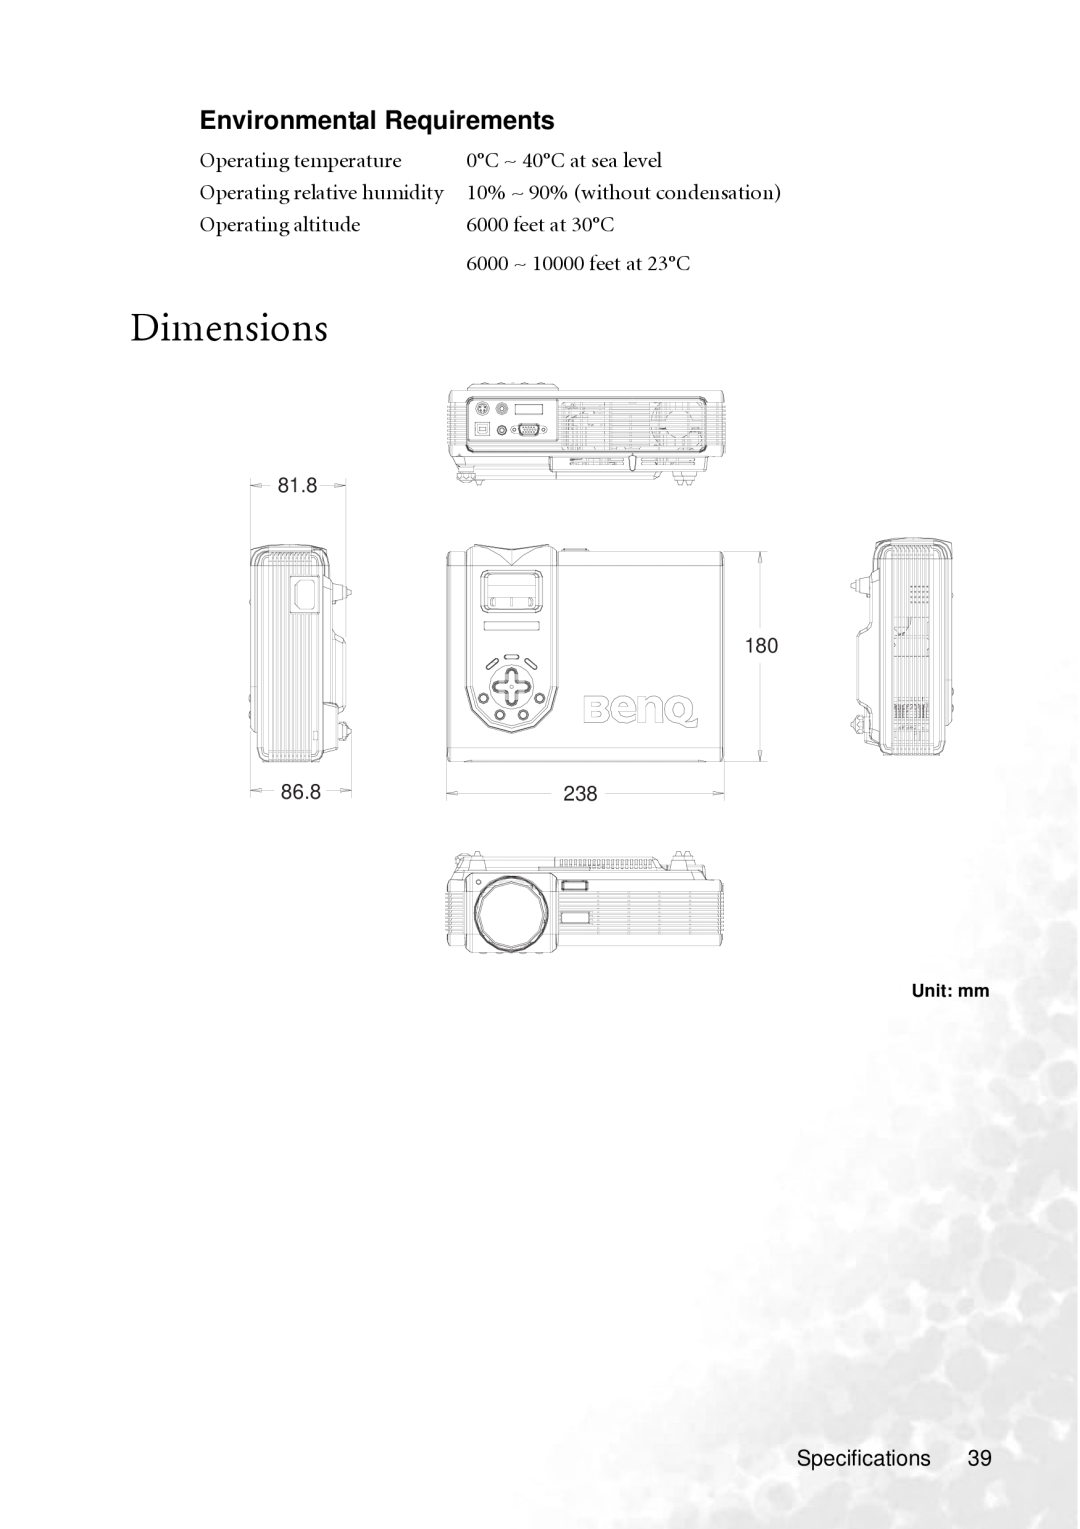 BenQ PB2240 user manual Dimensions, Environmental Requirements, 81.8 180 86.8238, 10% ~ 90% without condensation, Unit mm 